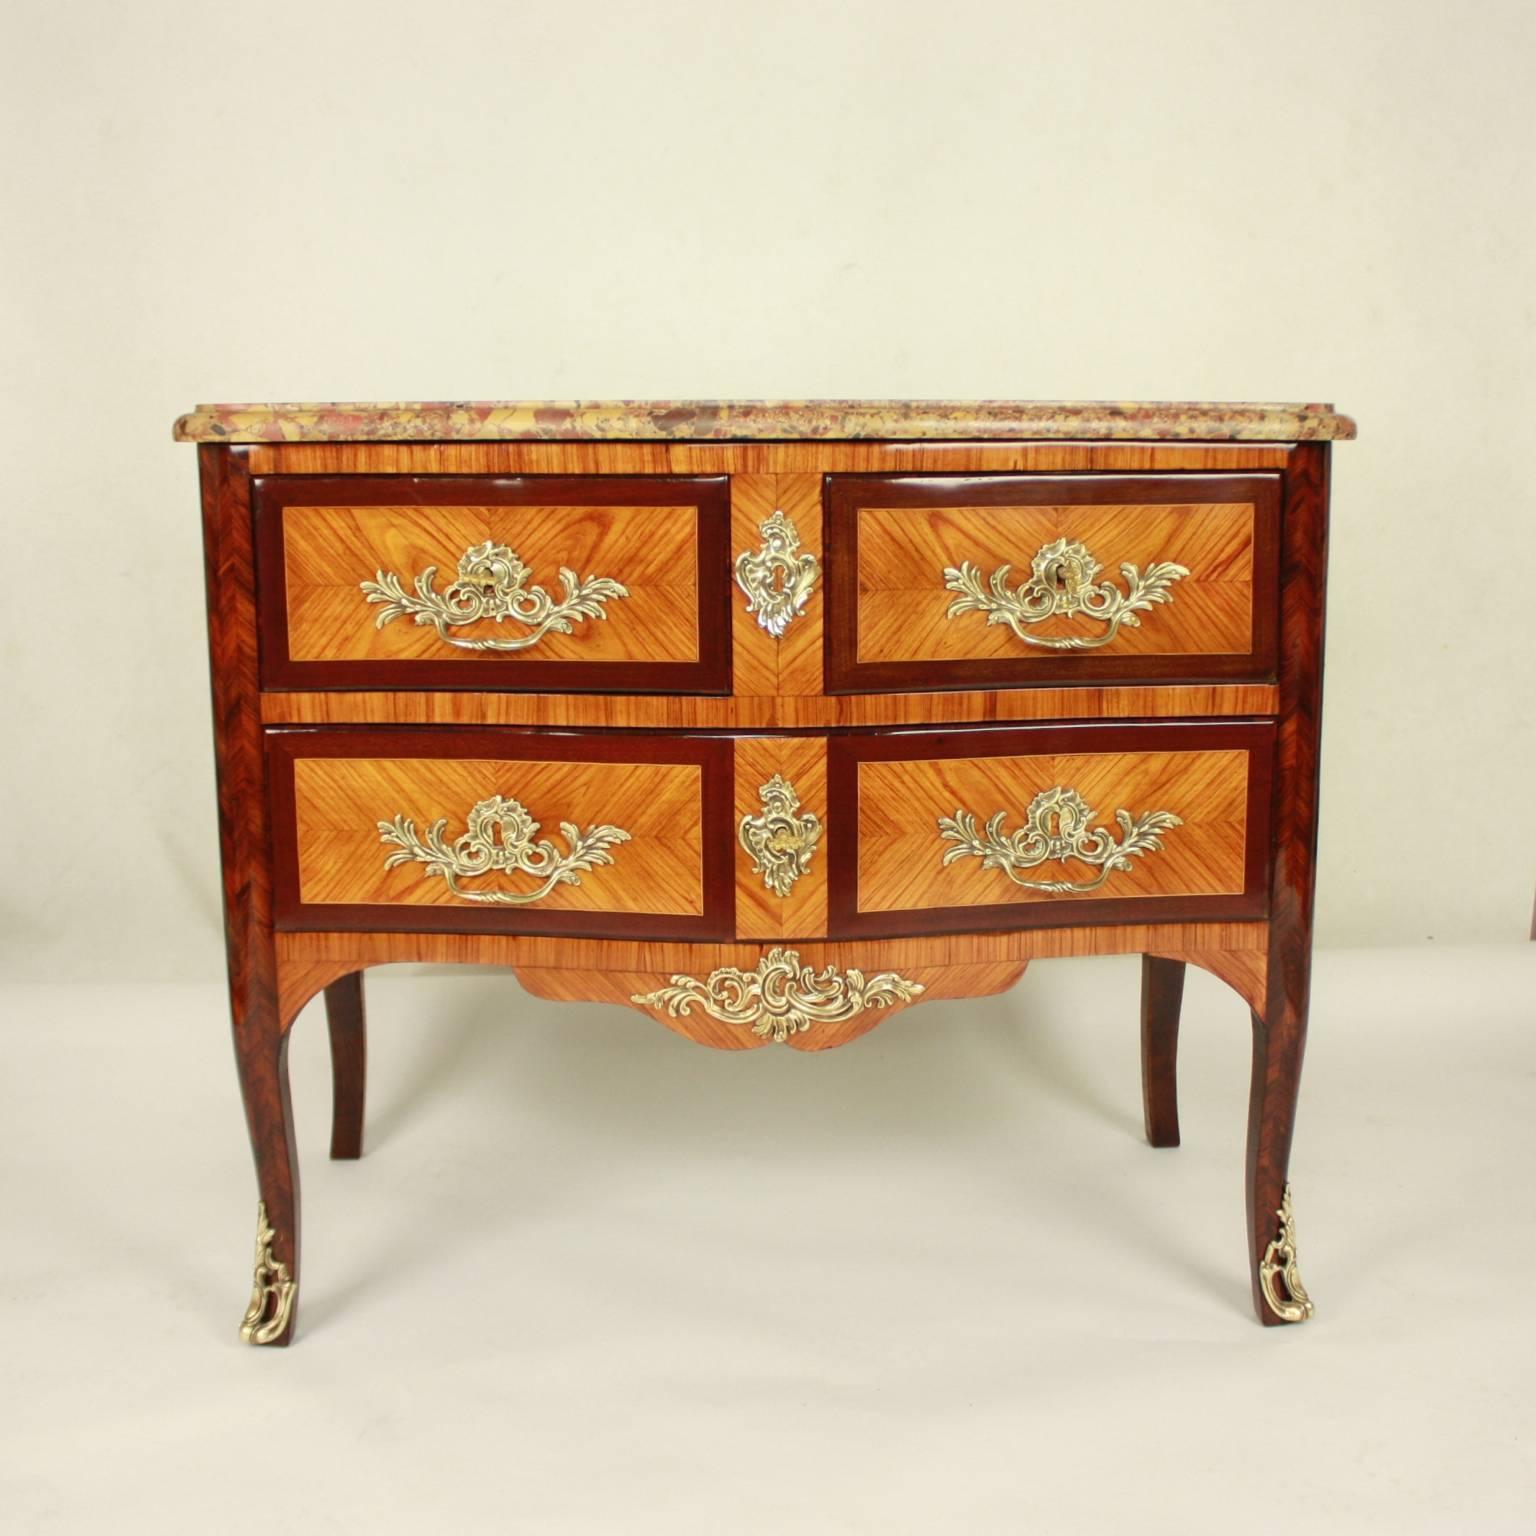 A small Louis XV commode attributed to Antoine Mathieu Criaerd, called “Criard“ (circa 1727-1787, maître from 1747), with two small drawers and one long drawer, with a serpentine shaped front, veneered 'en fougère' on the sides and 'quarter foil' on